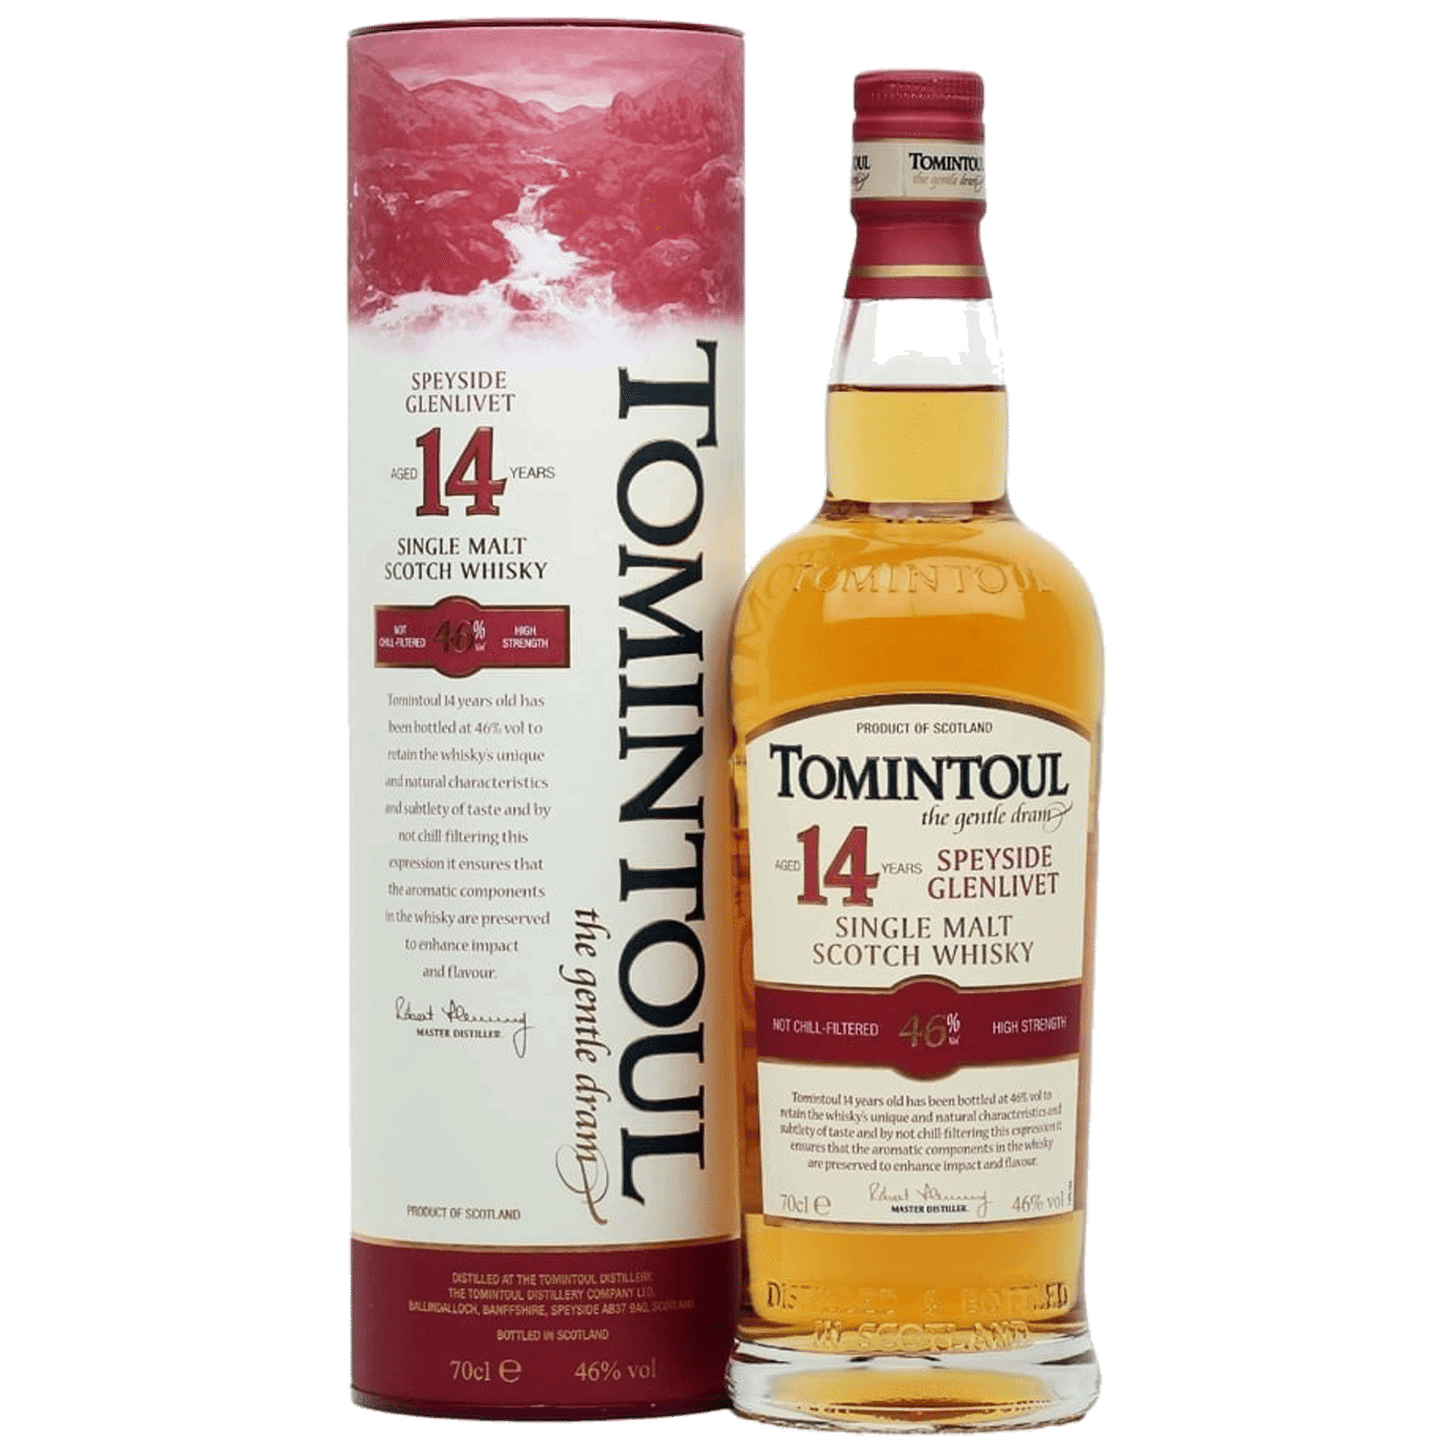 TOMINTOUL 14 YEAR OLD